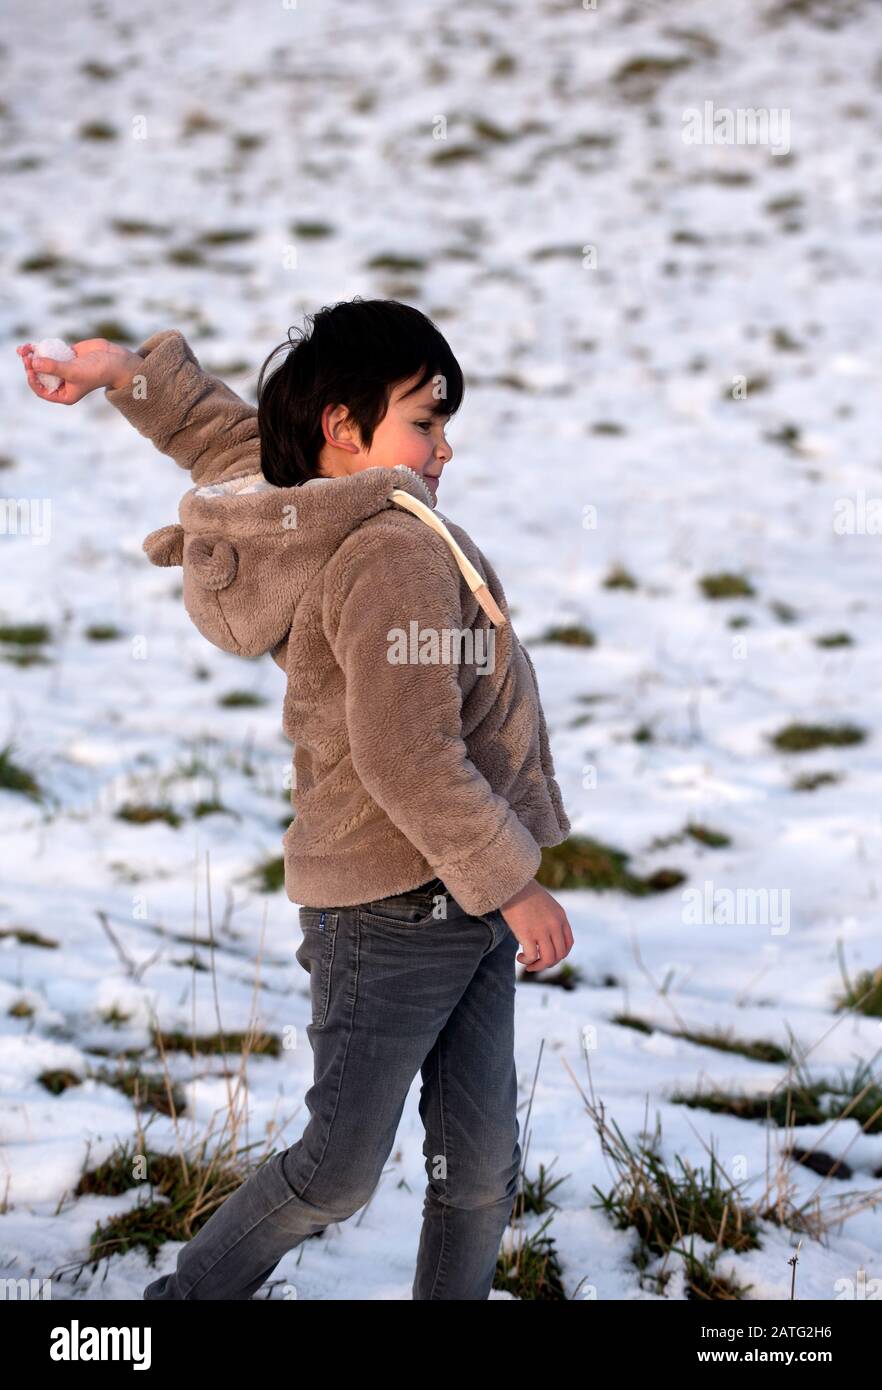 Child throwing a snowball Stock Photo